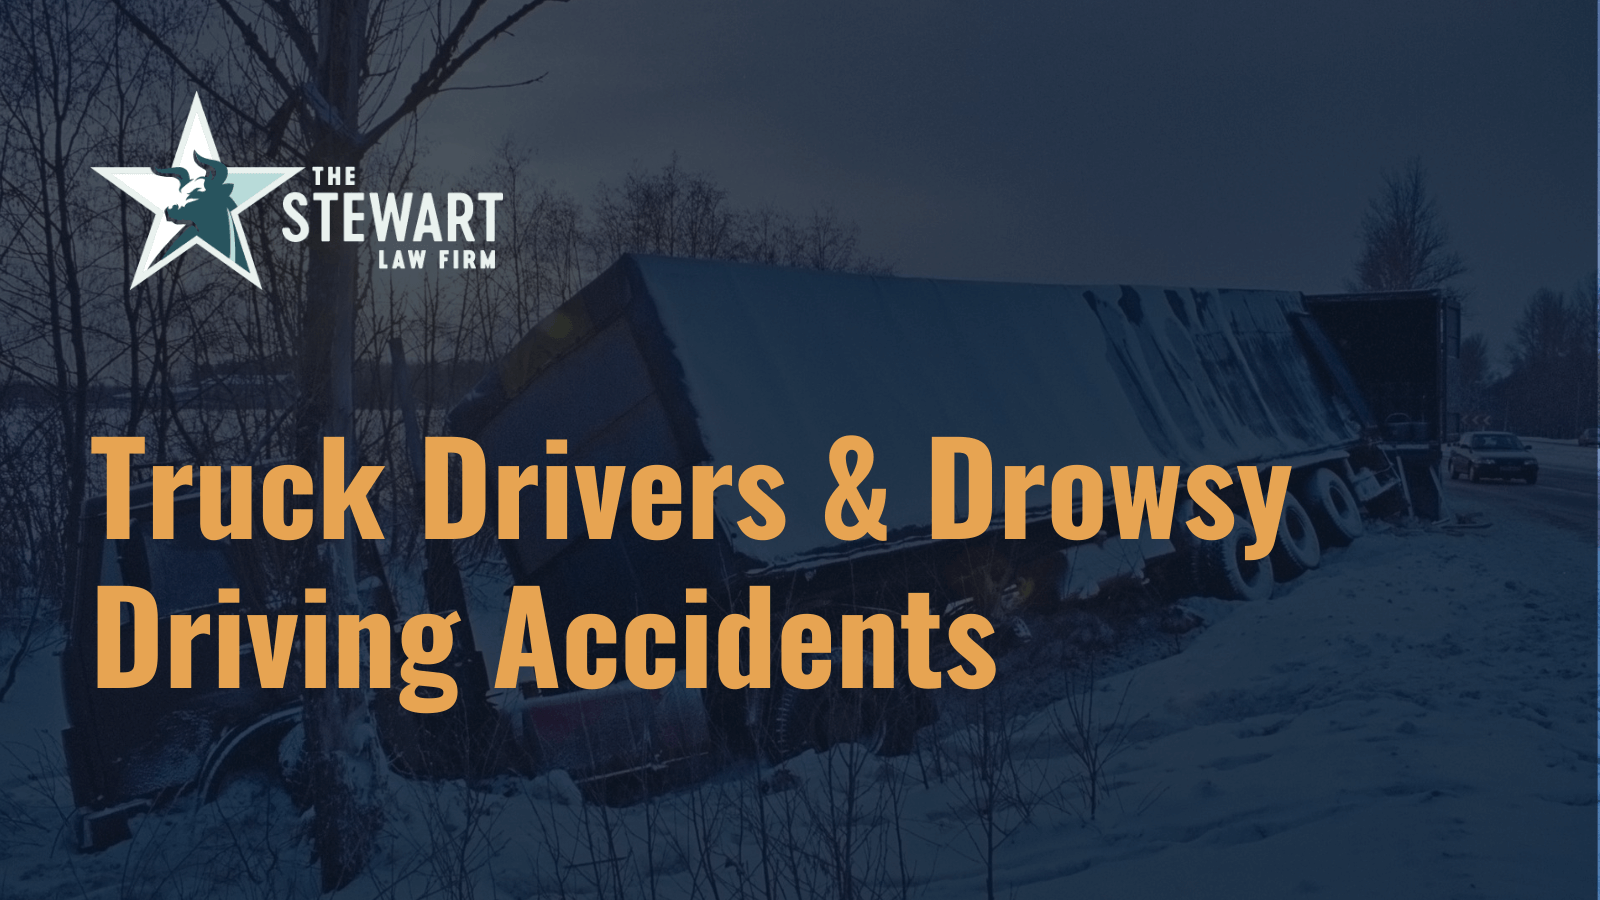 Truck Drivers & Drowsy Driving Accidents - the stewart law firm - austin texas personal injury lawyer.png